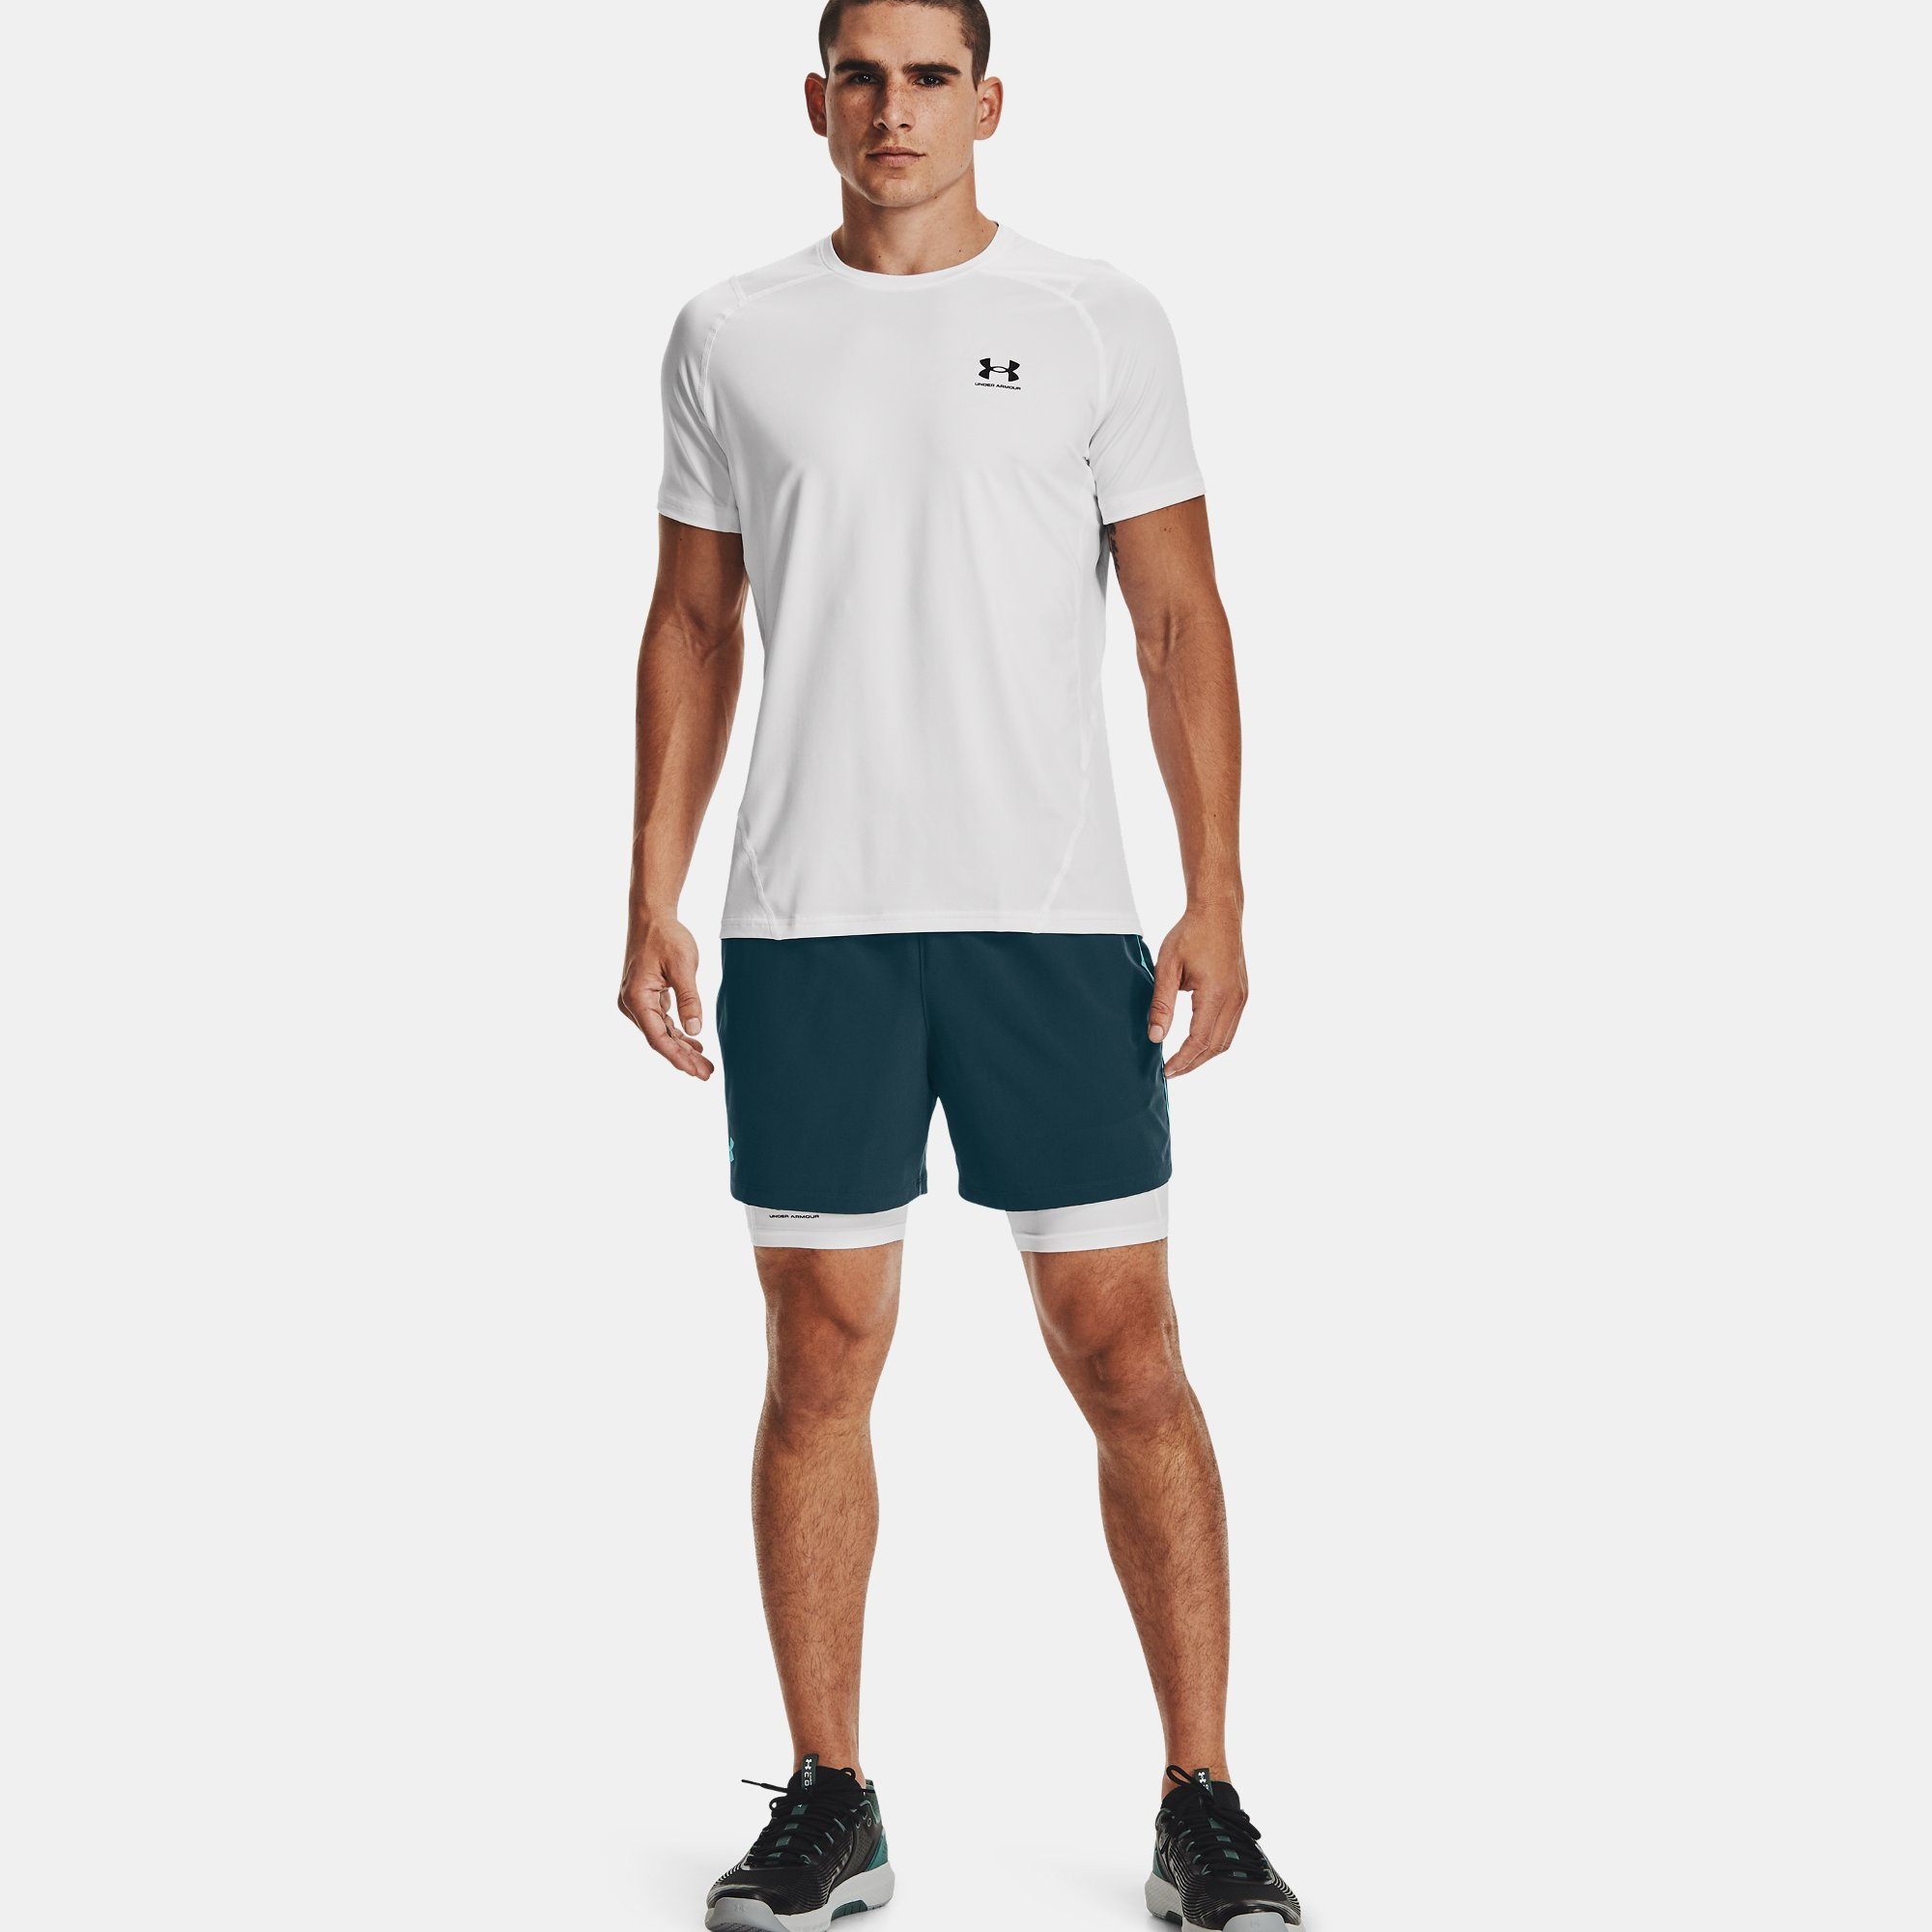 Under Armour Coolswitch Compression Short White 1271333-100 - Free Shipping  at LASC